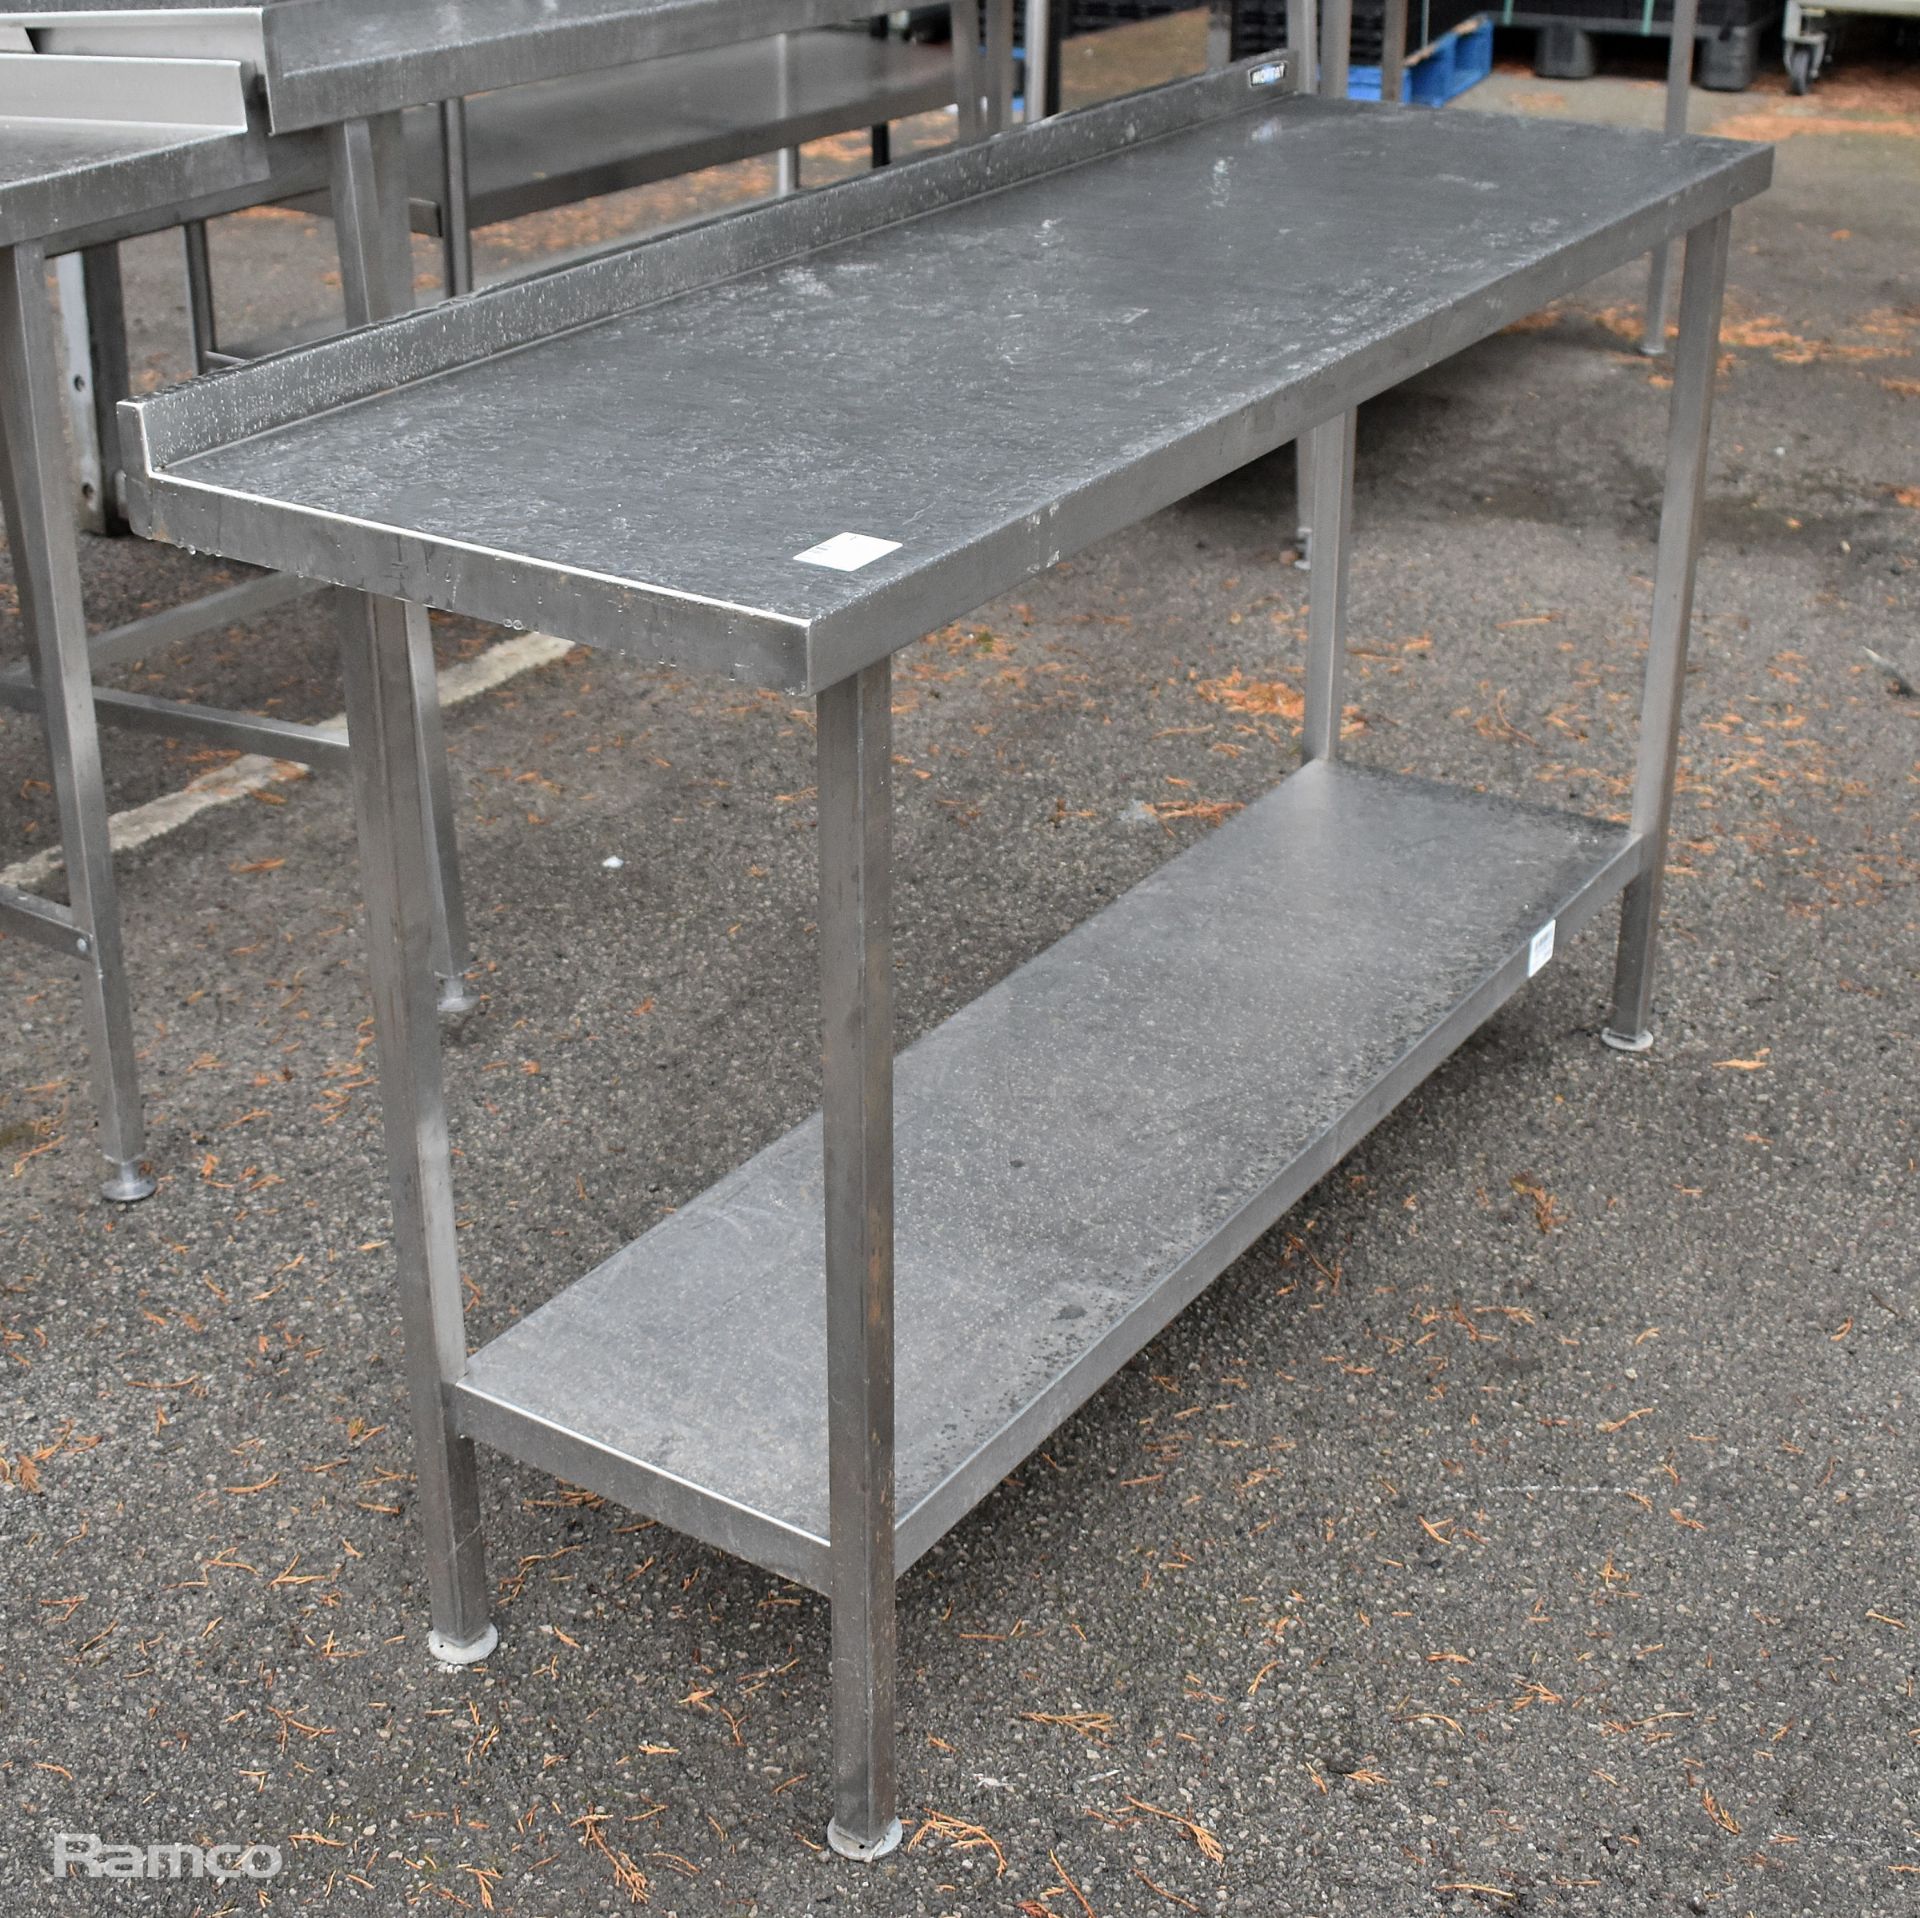 Moffat stainless steel table with undershelf - 150x50x94cm - Image 2 of 4